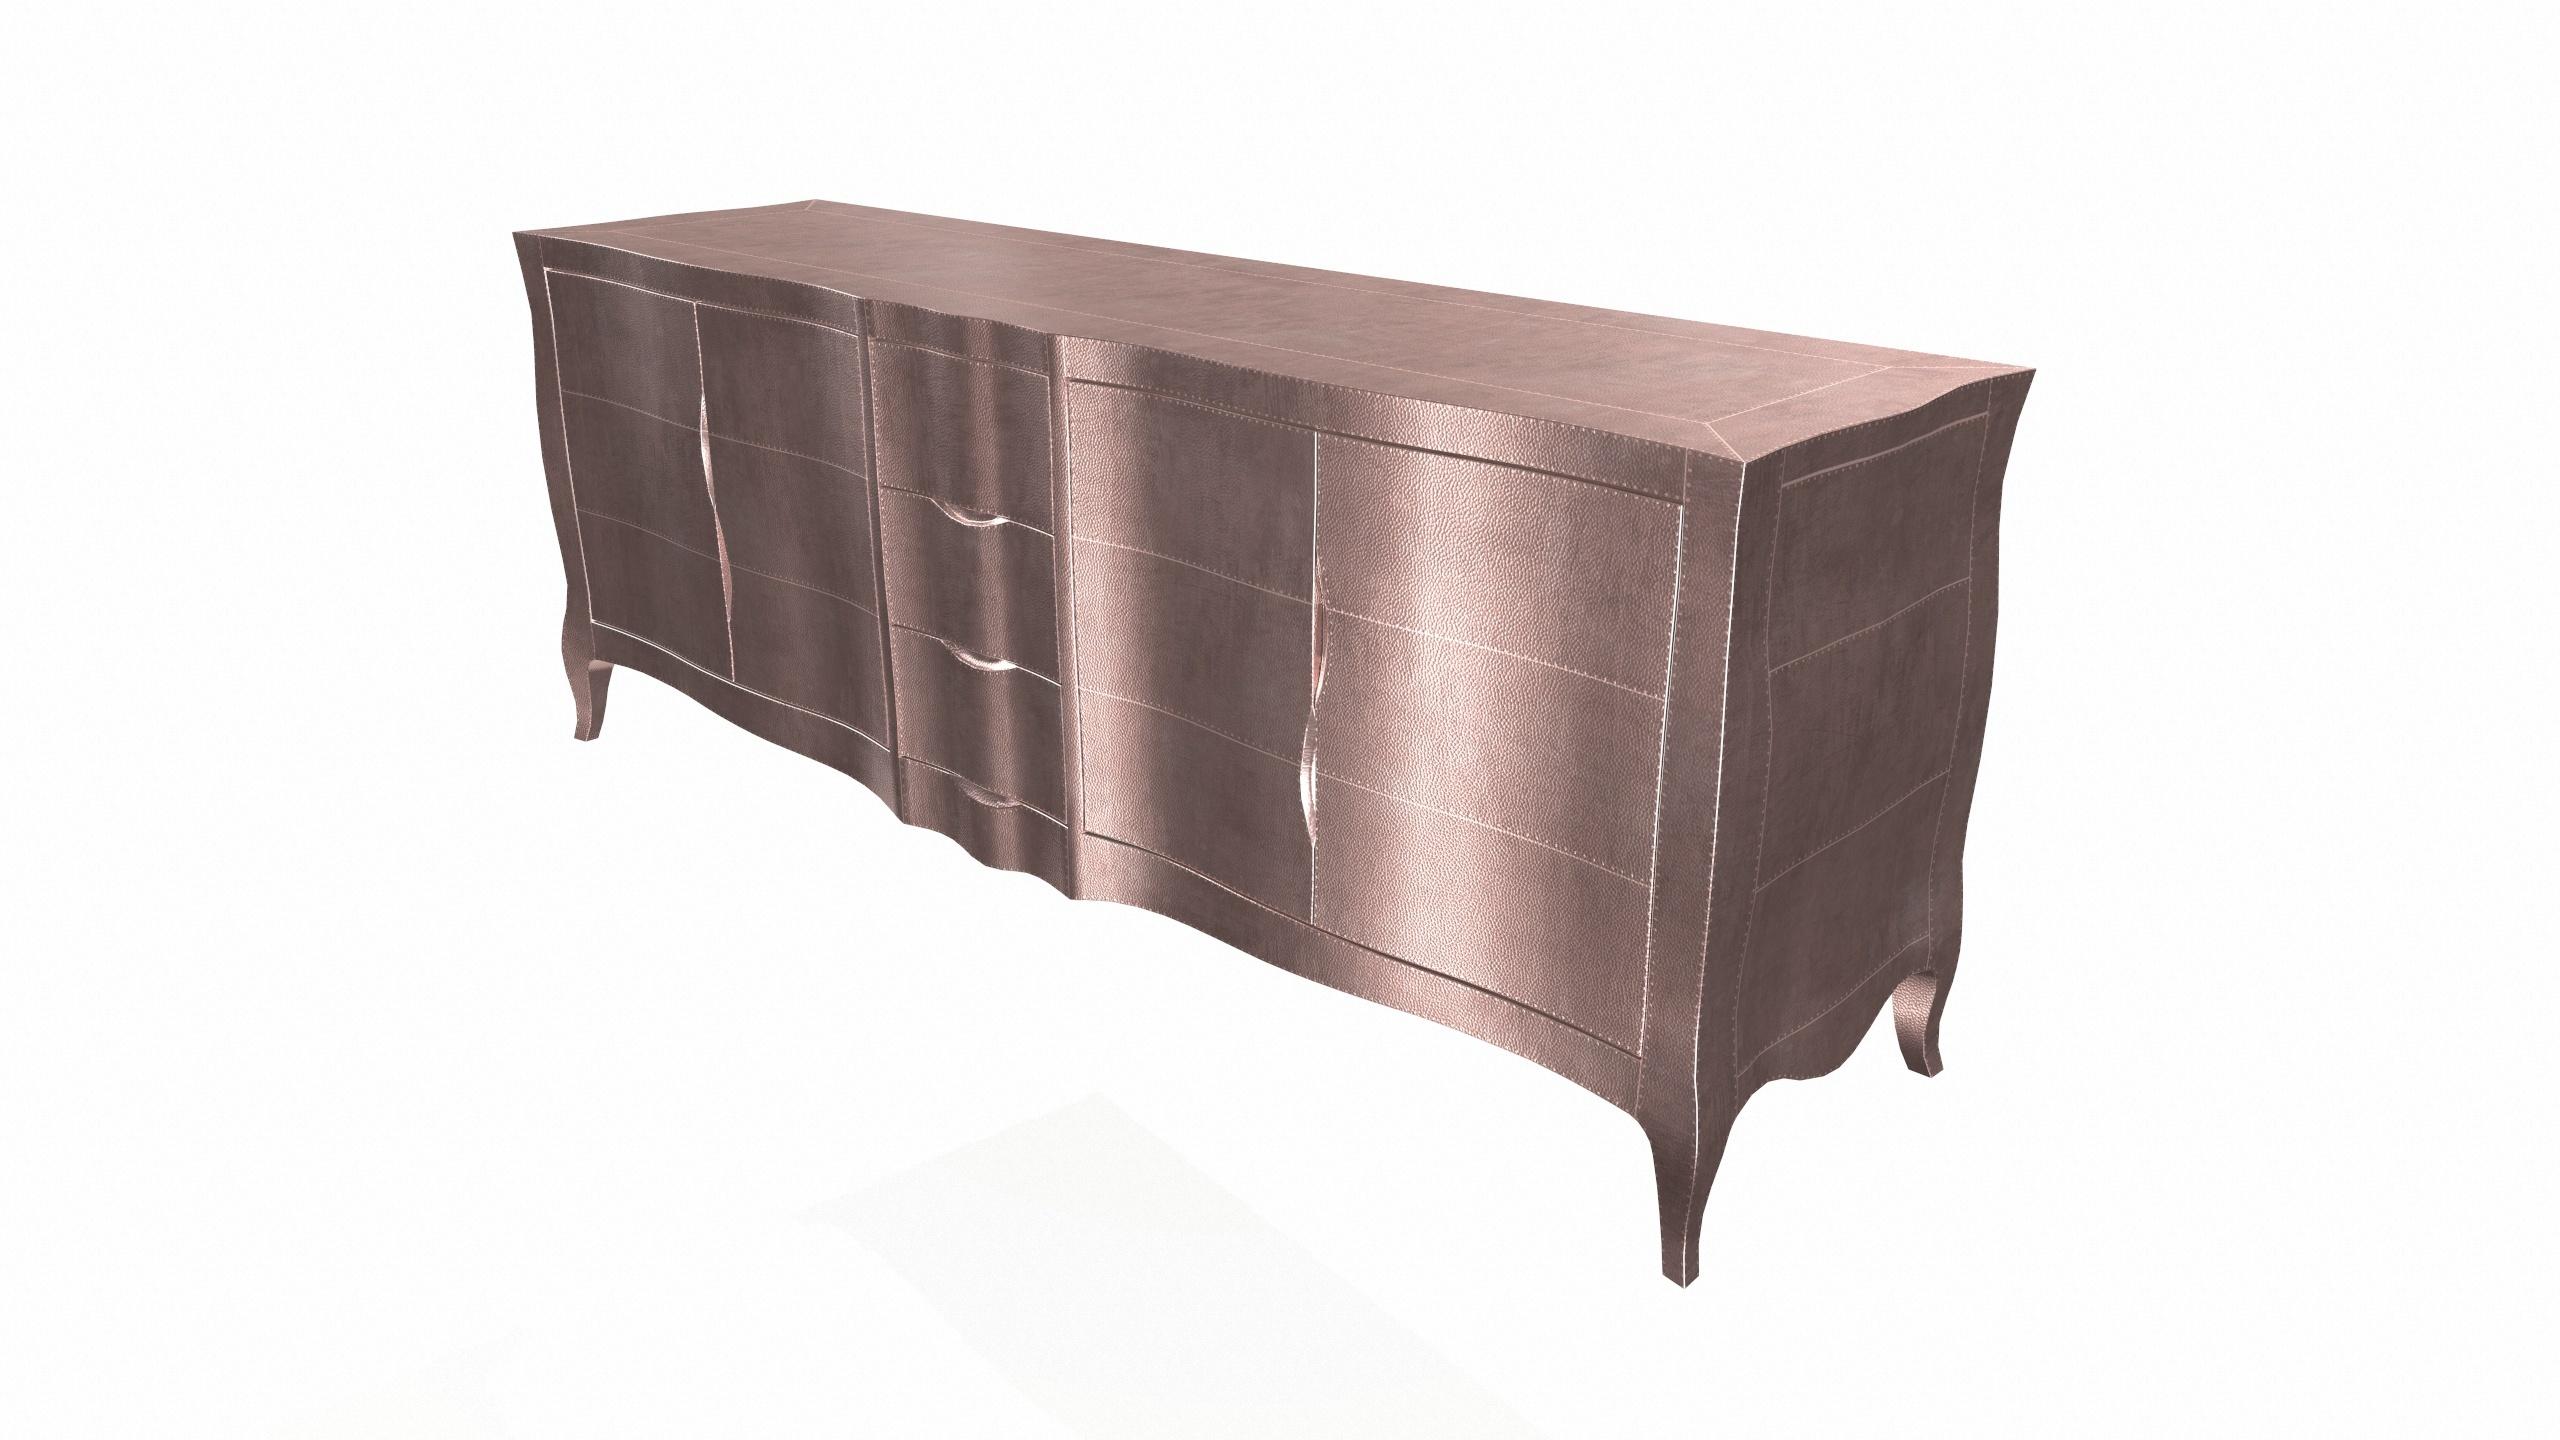 American Louise Credenza Art Deco Cupboards in Mid. Hammered Copper by Paul Mathieu For Sale